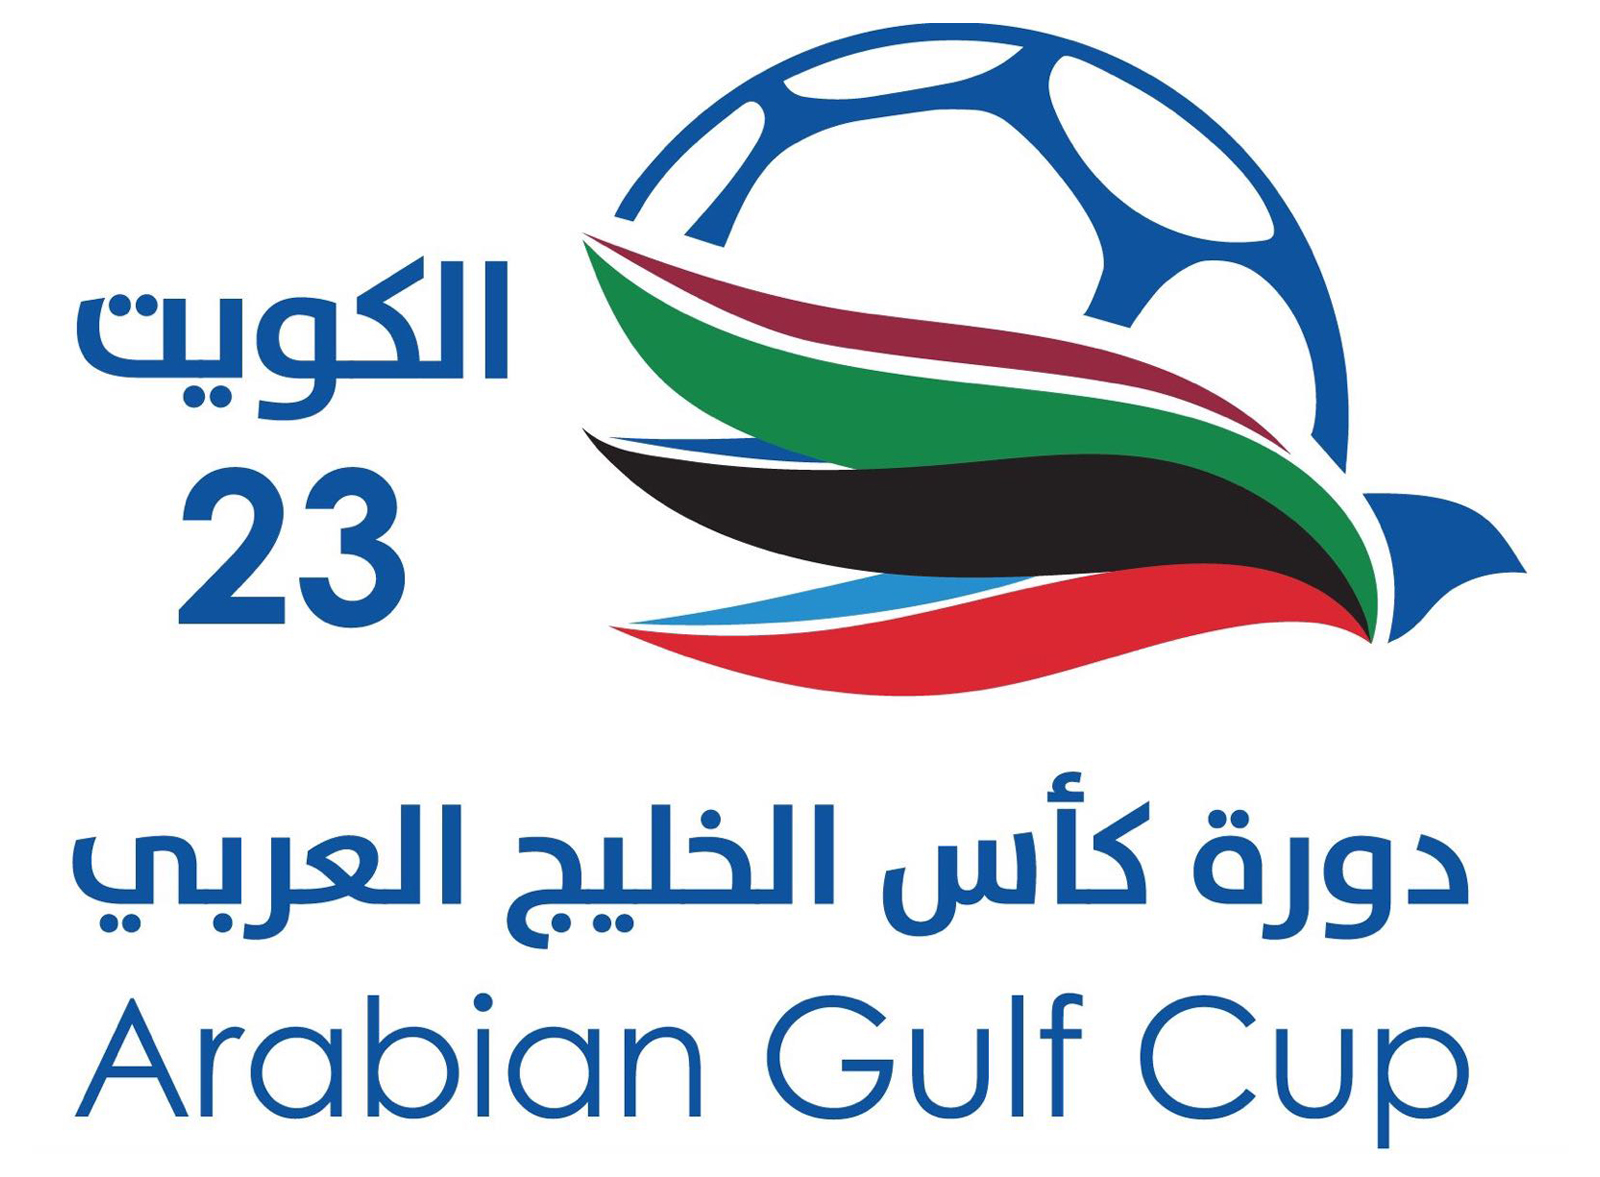 Kuwait and UAE meet tomorrow at end of Group A competitions of Gulf cup                                                                                                                                                                                   